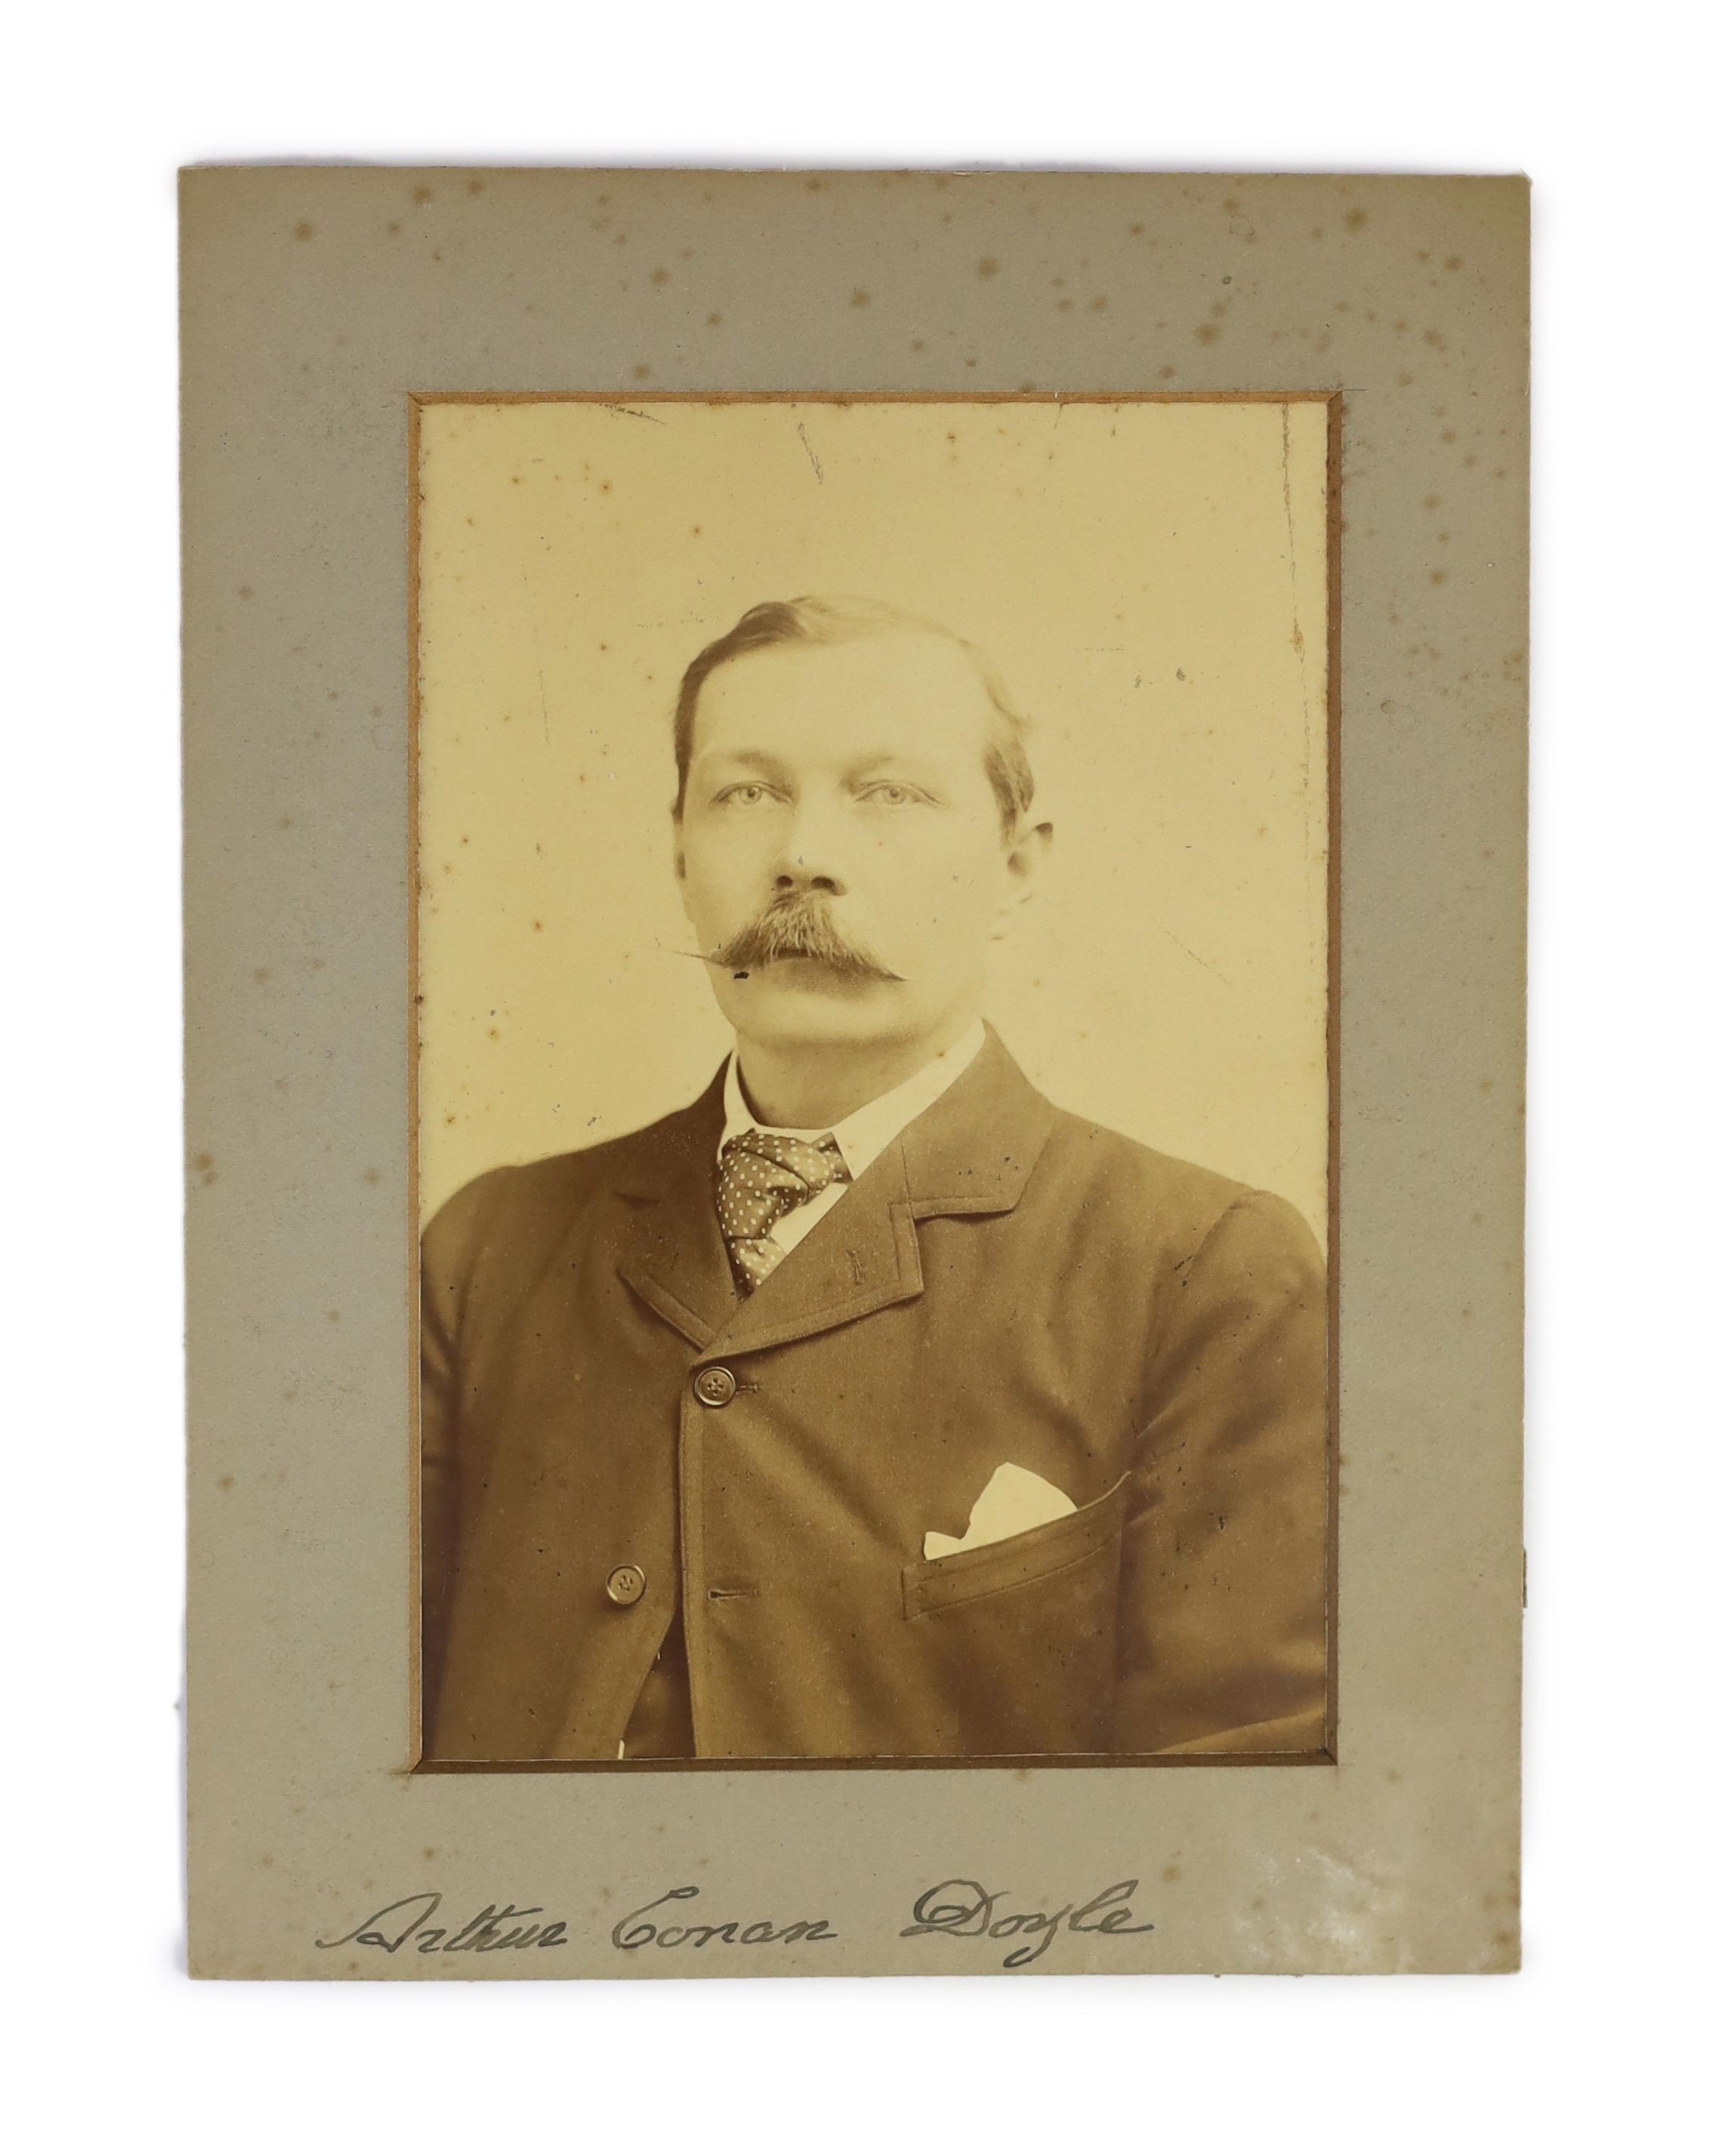 Doyle, Arthur Conan, Sir (1859-1930) a printed photograph, by Elliott and Fry, 55, Baker Street, London, signed on the mount, the signature probably added by Elliott and Fry 14 x 9.5cms